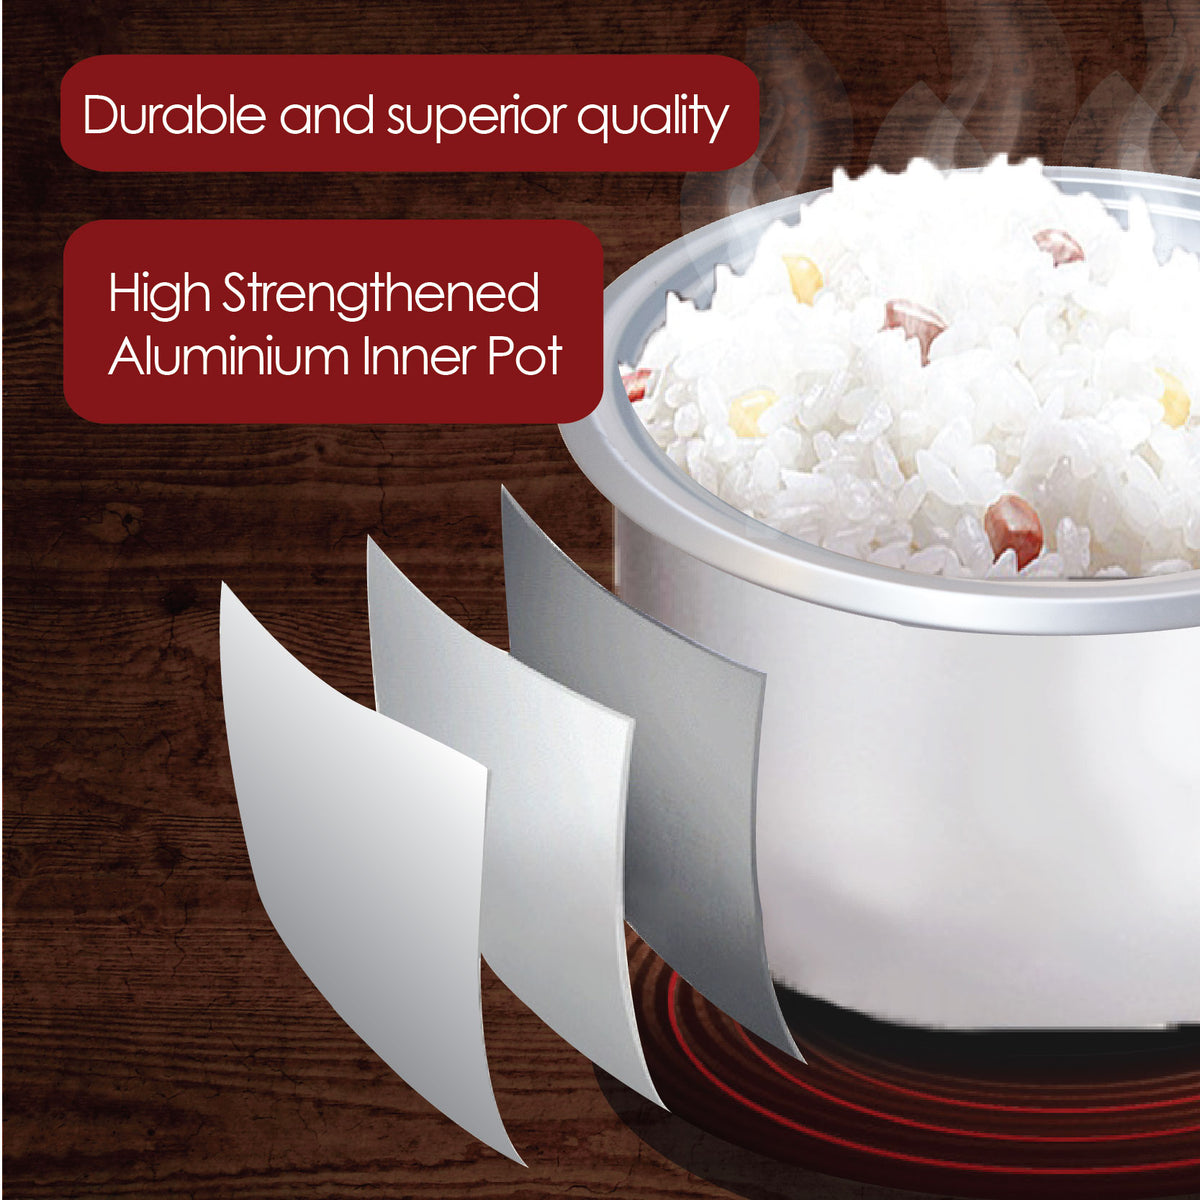 1.5L Rice Cooker with  Aluminium Inner Pot (PPRC6) - PowerPacSG